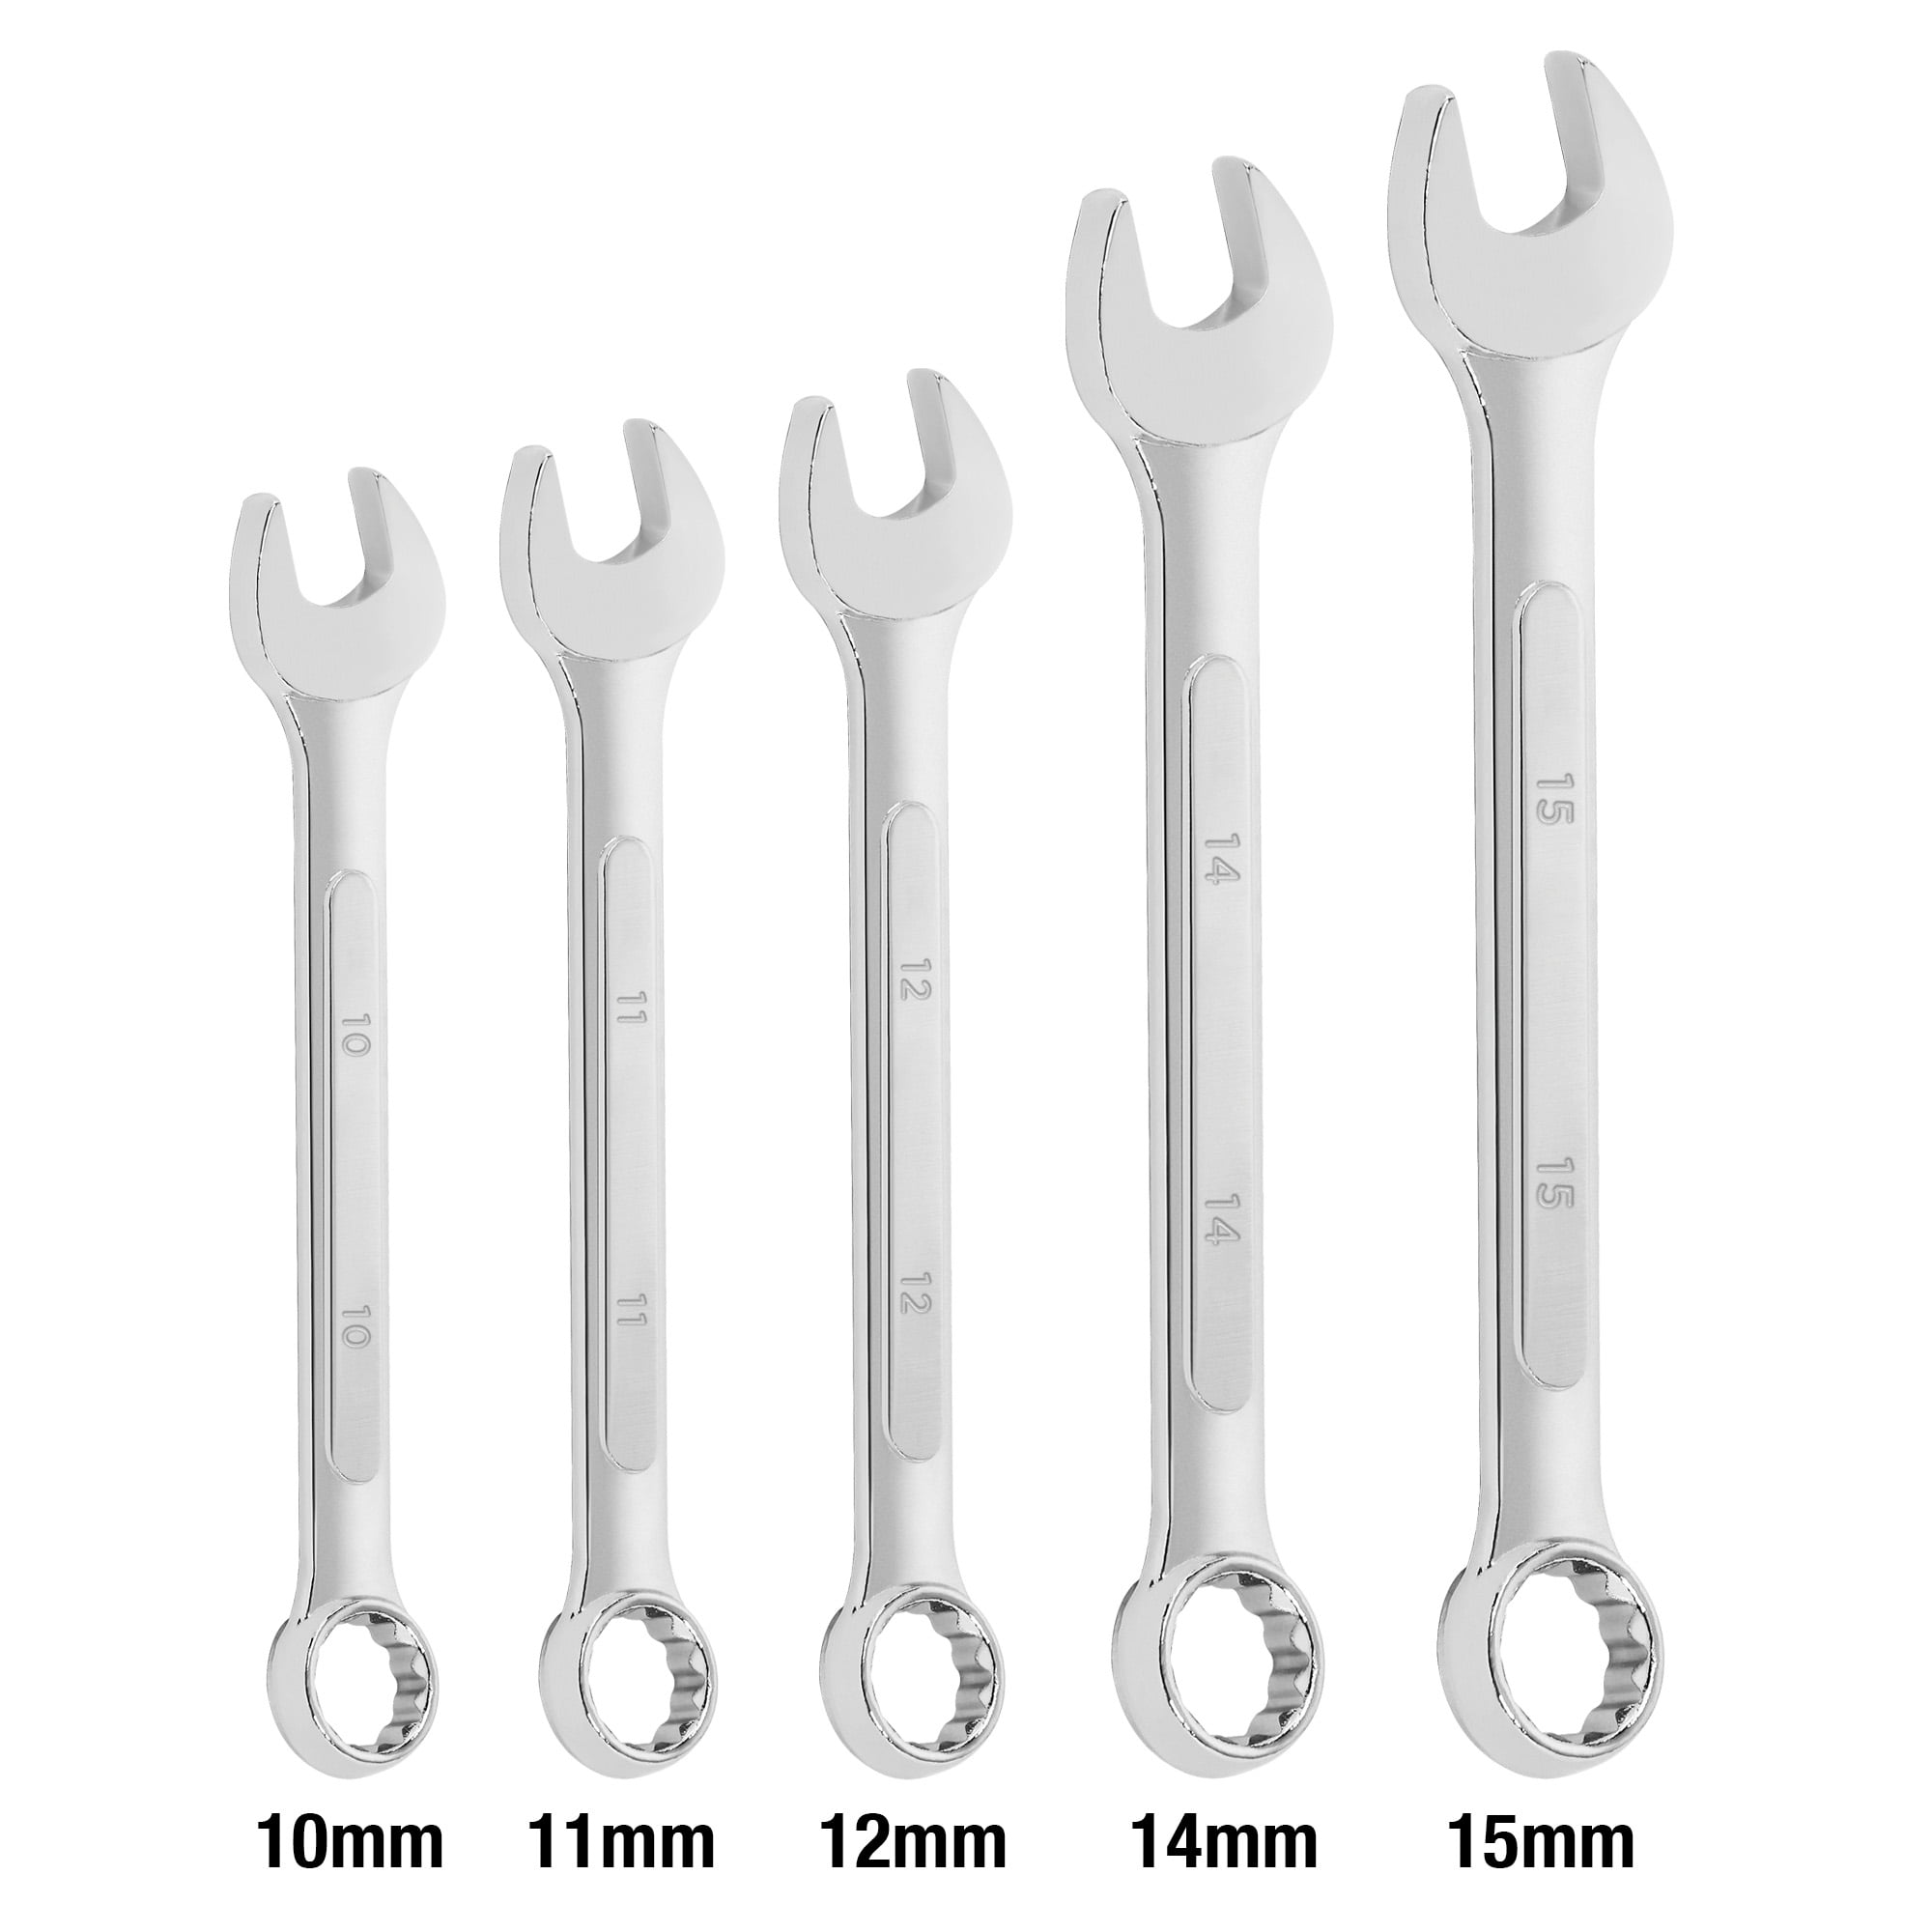 TradesPro 5 Pc Metric Combination Wrench - 835136 